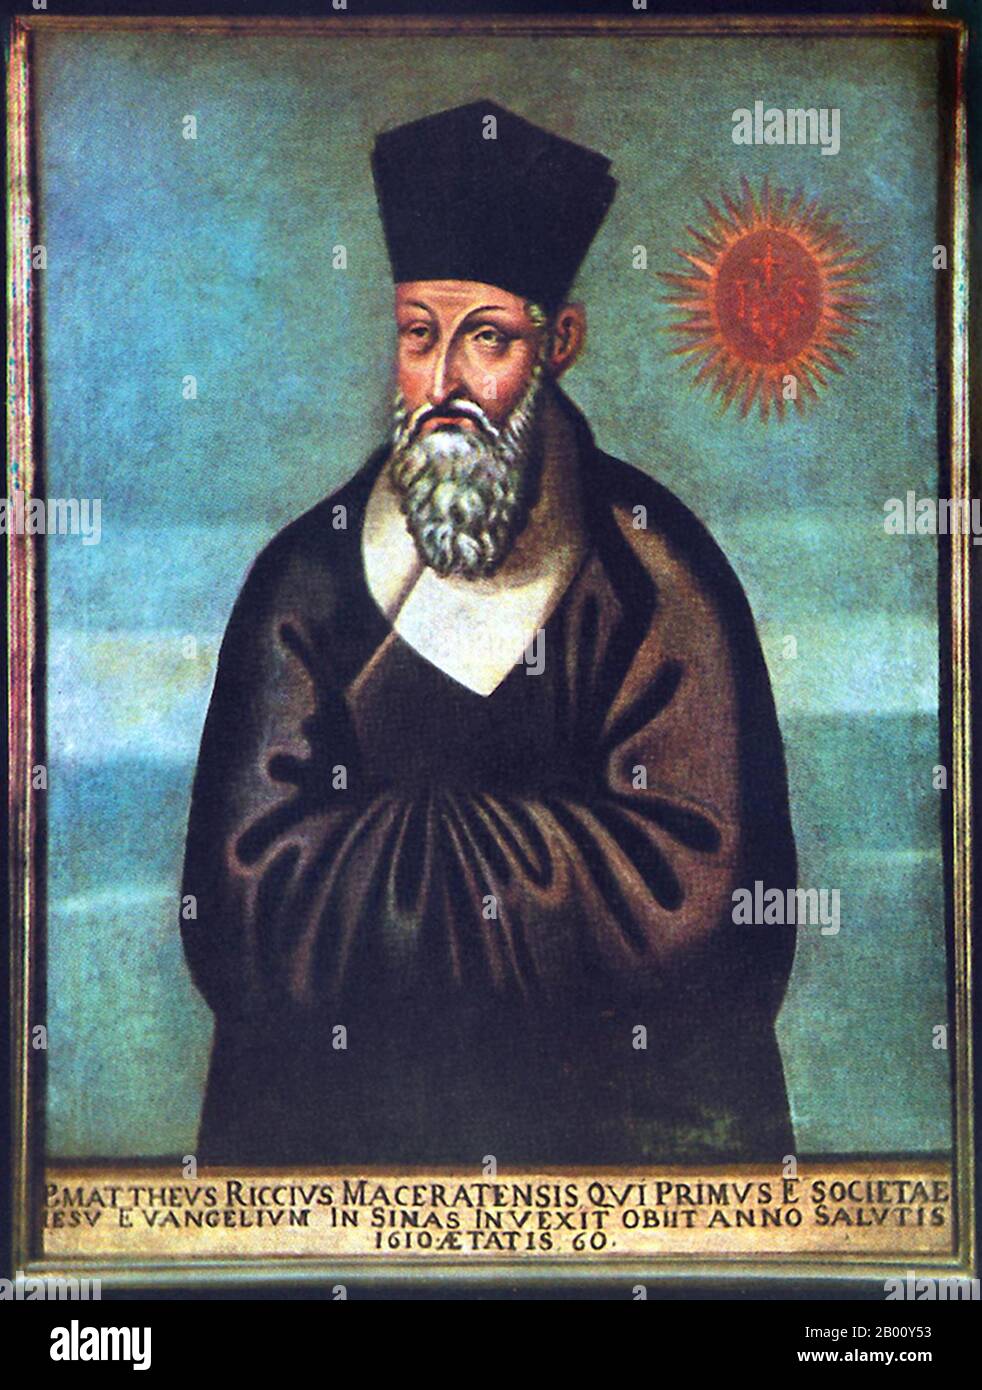 China: Matteo Ricci, SJ (1552 – 1610). Painted in 1610 by the Chinese brother Emmanuel Pereira (born Yu Wen-hui), who had learned his art from the Italian Jesuit, Giovanni Nicolao.  Matteo Ricci, SJ (October 6, 1552 – May 11, 1610; simplified Chinese: Lì Mǎdòu; courtesy name:  Xītài) was an Italian Jesuit priest, and one of the founding figures of the Jesuit China Mission. The age is incorrect: Ricci died during his fifty-eighth year. The portrait was taken to Rome in 1616 and displayed at the Jesuit house together with paintings of Ignatius of Loyola and Francis Xavier. It still hangs there. Stock Photo